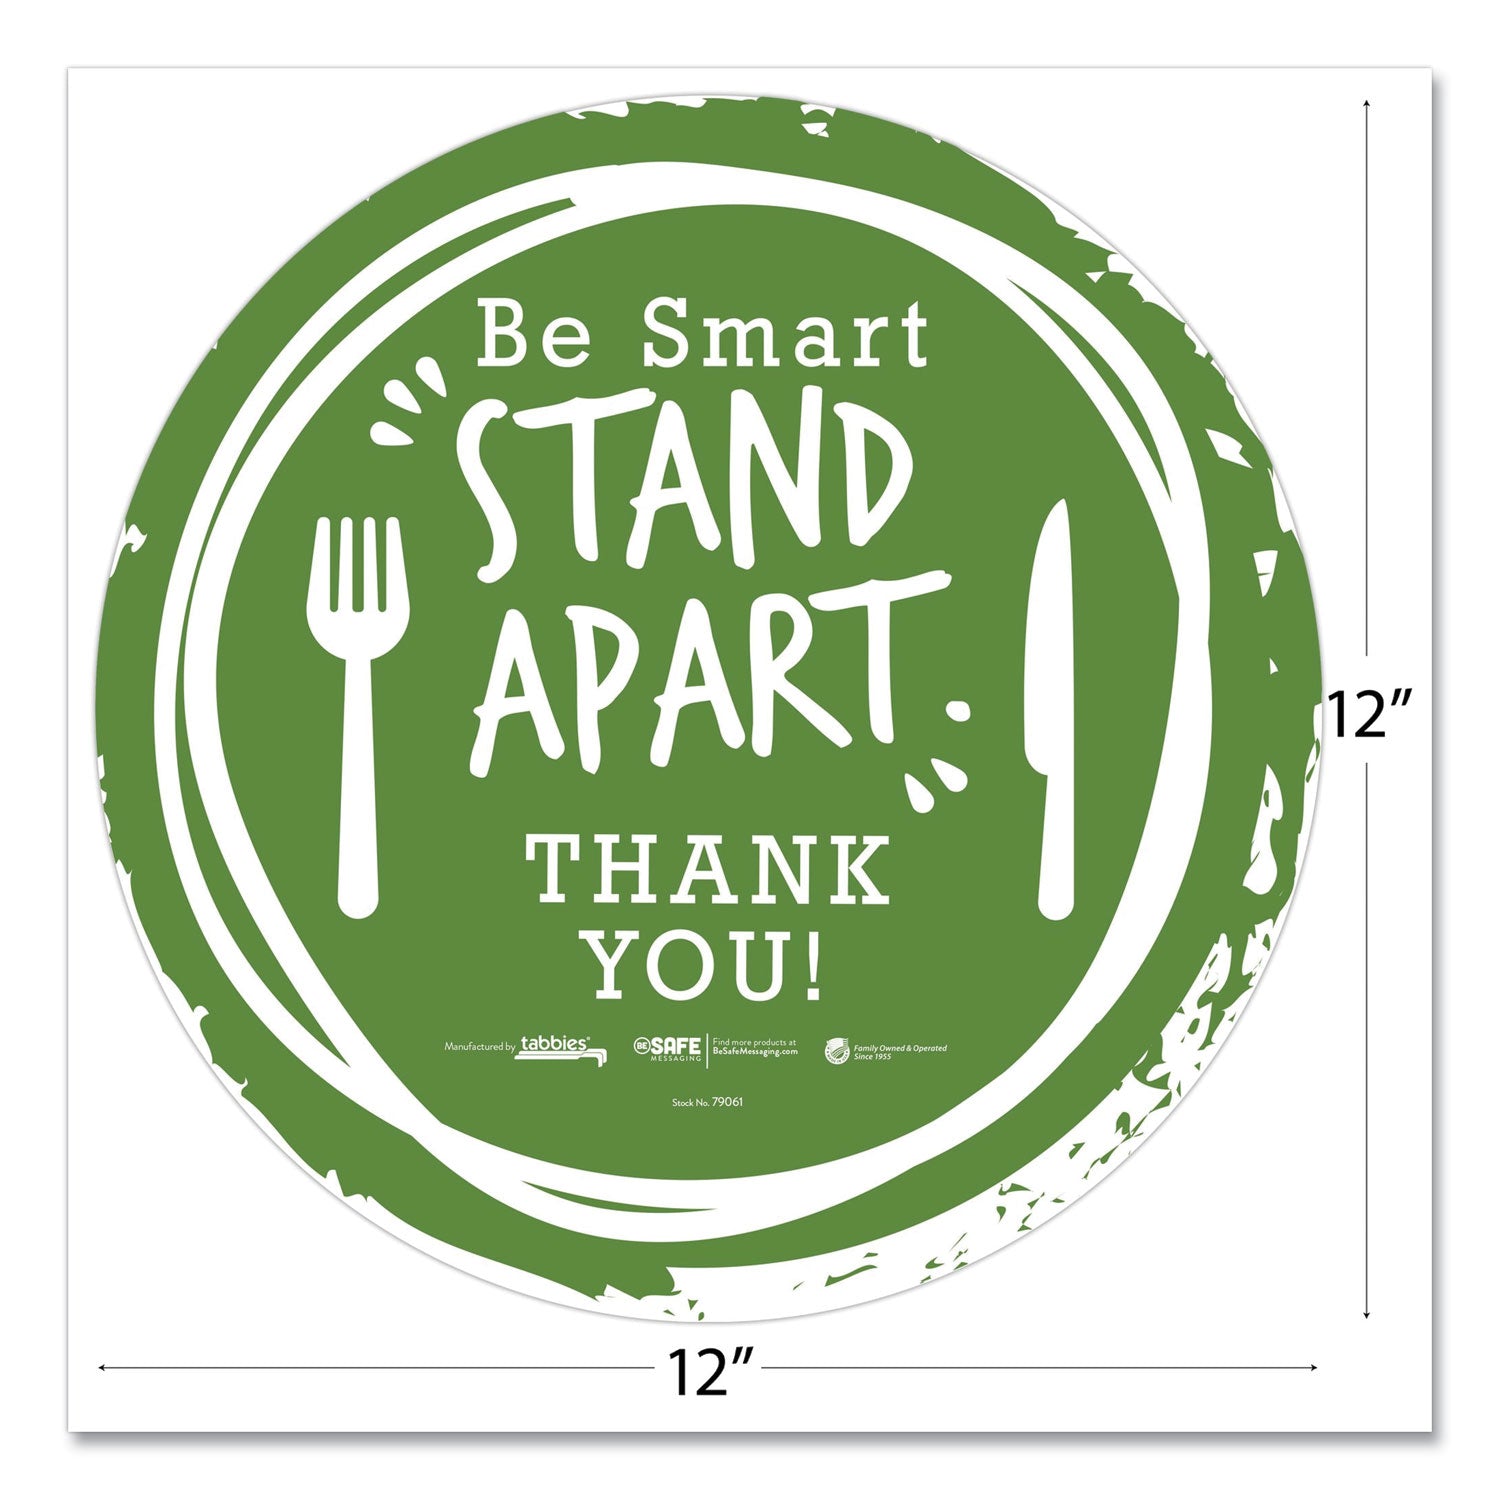 besafe-messaging-floor-decals-be-smart-stand-apart;-knife-fork;-thank-you-12-dia-green-white-60-carton_tab79161 - 2